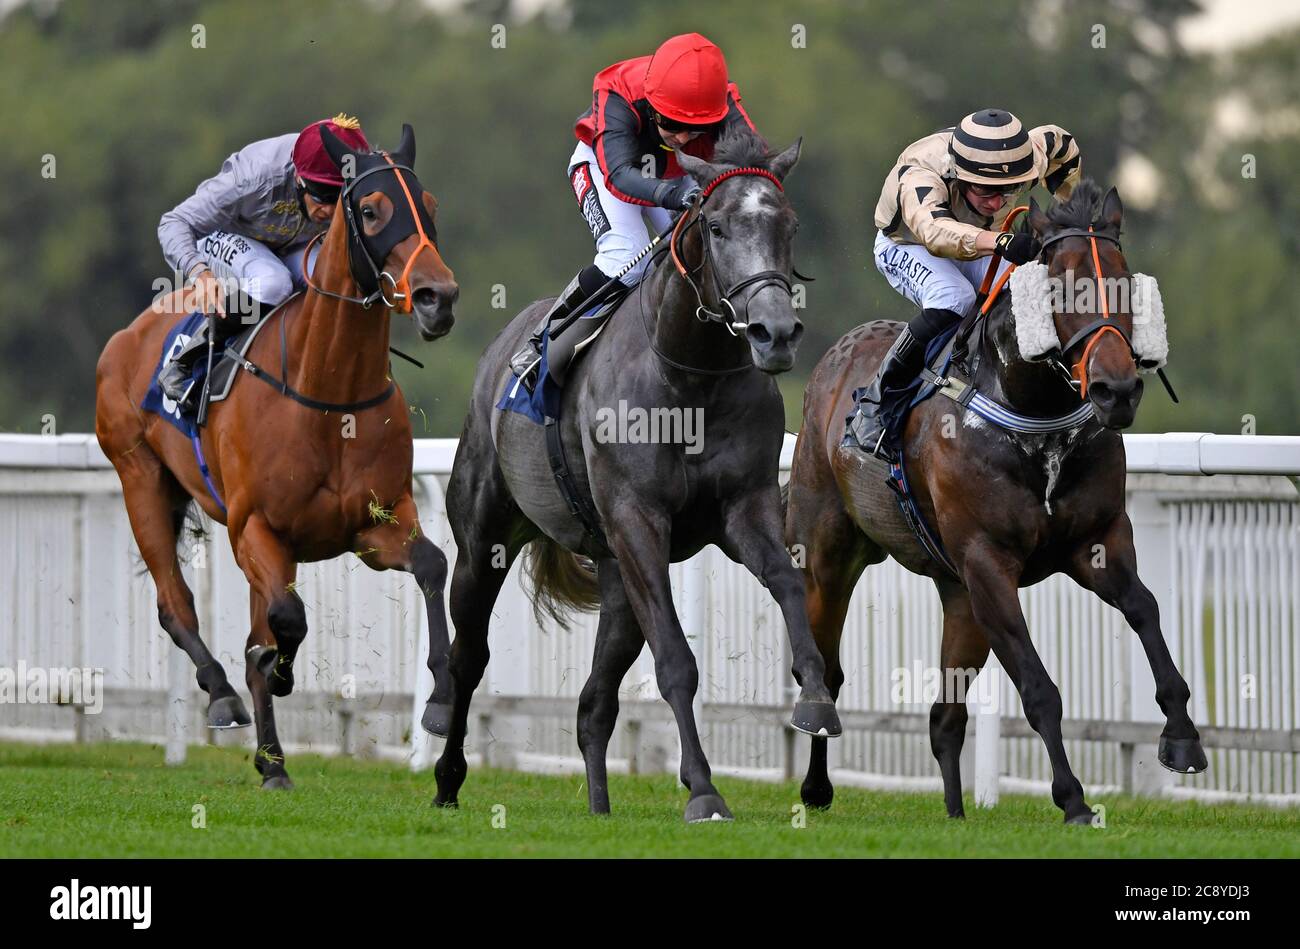 Broughtons Gold ridden by Hayley Turner (centre) wins the Final Furlong Podcast Handicap (Div II) at Royal Windsor Racecourse. Stock Photo